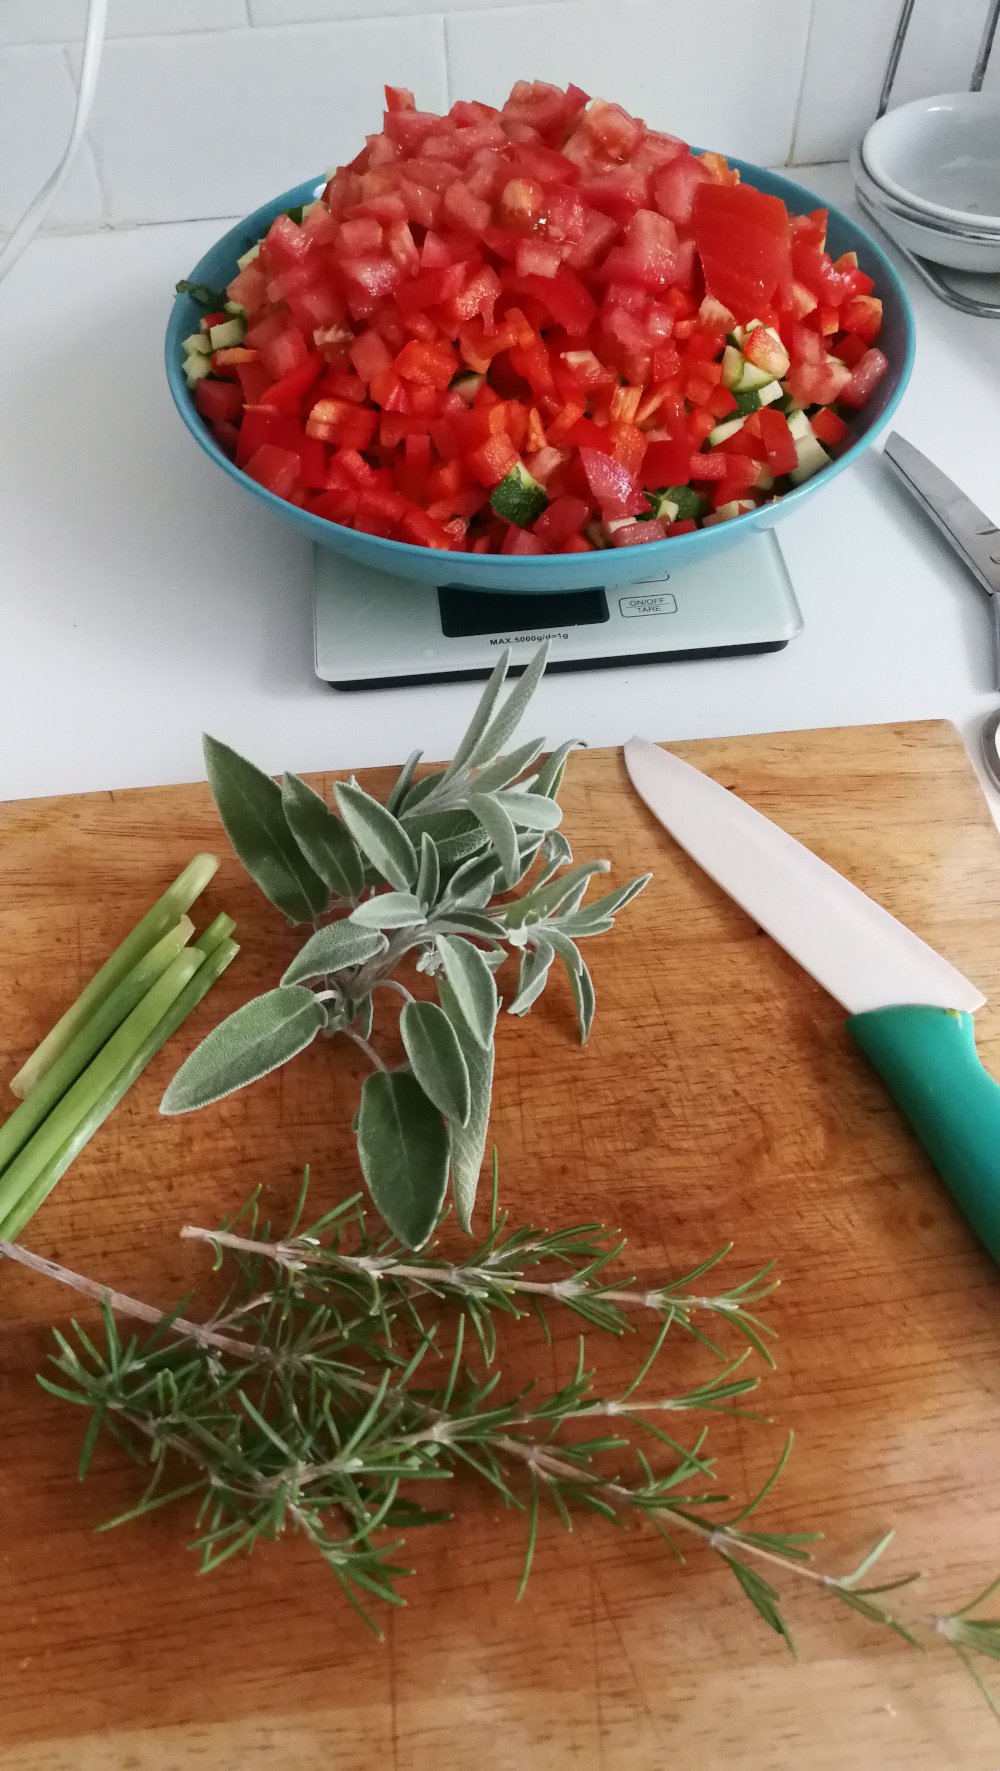 A photo of a white kitchen work surface. A wooden chopping board has sage, rosemary sprigs and spring onions on it with a green and white knife. In the background is a blue bowl on top of a digital scales full of chopped tomatoes, peppers, courgettes